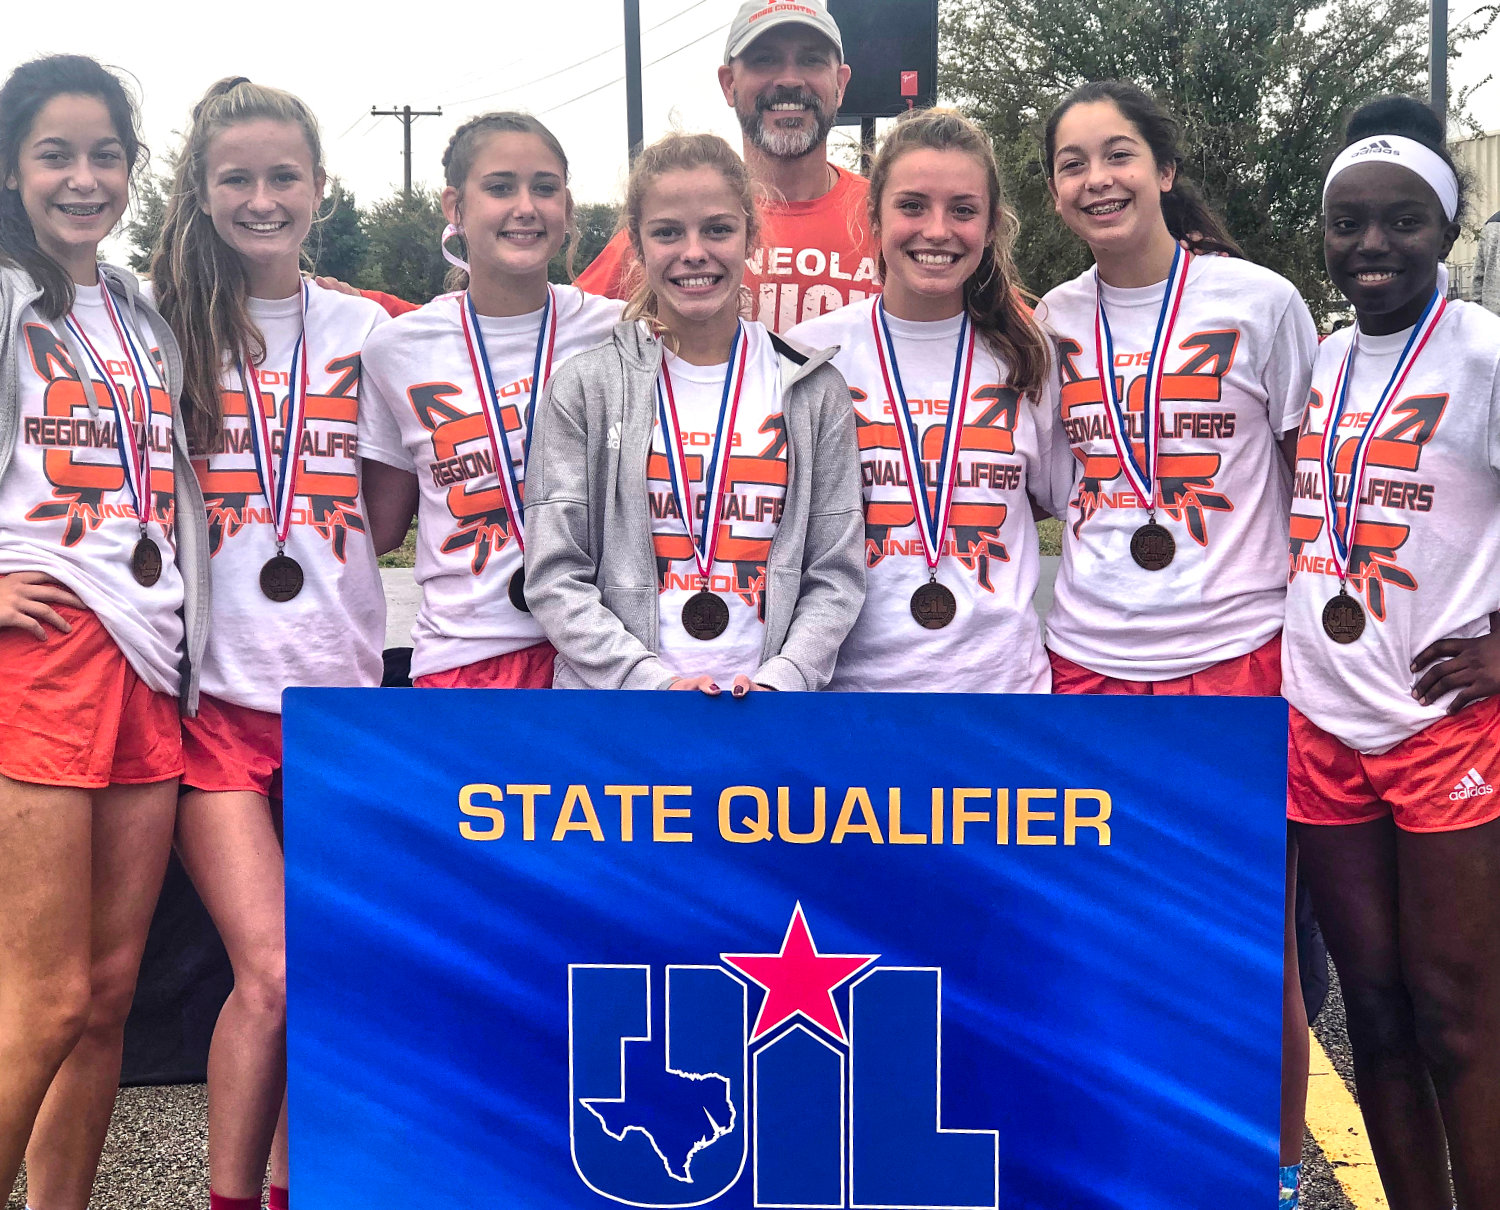 Mineola girls cross country team qualified for the state meet.